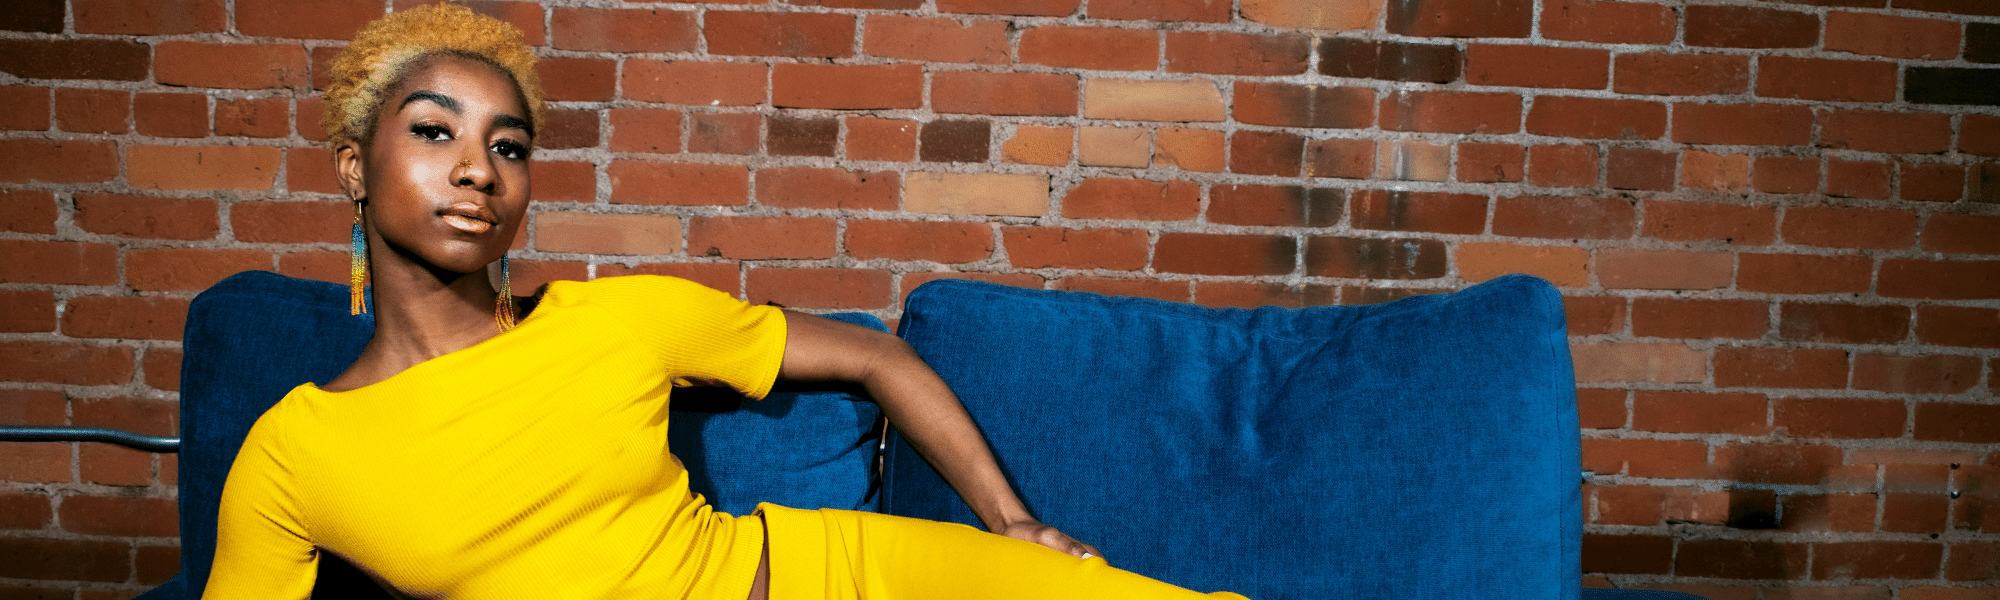 Black model with beaded earrings lounges on a blue velvet couch. The model is wearing a yellow crop top and skirt, and multicolored beaded earrings. They are looking into the camera with a calm and confident gaze.